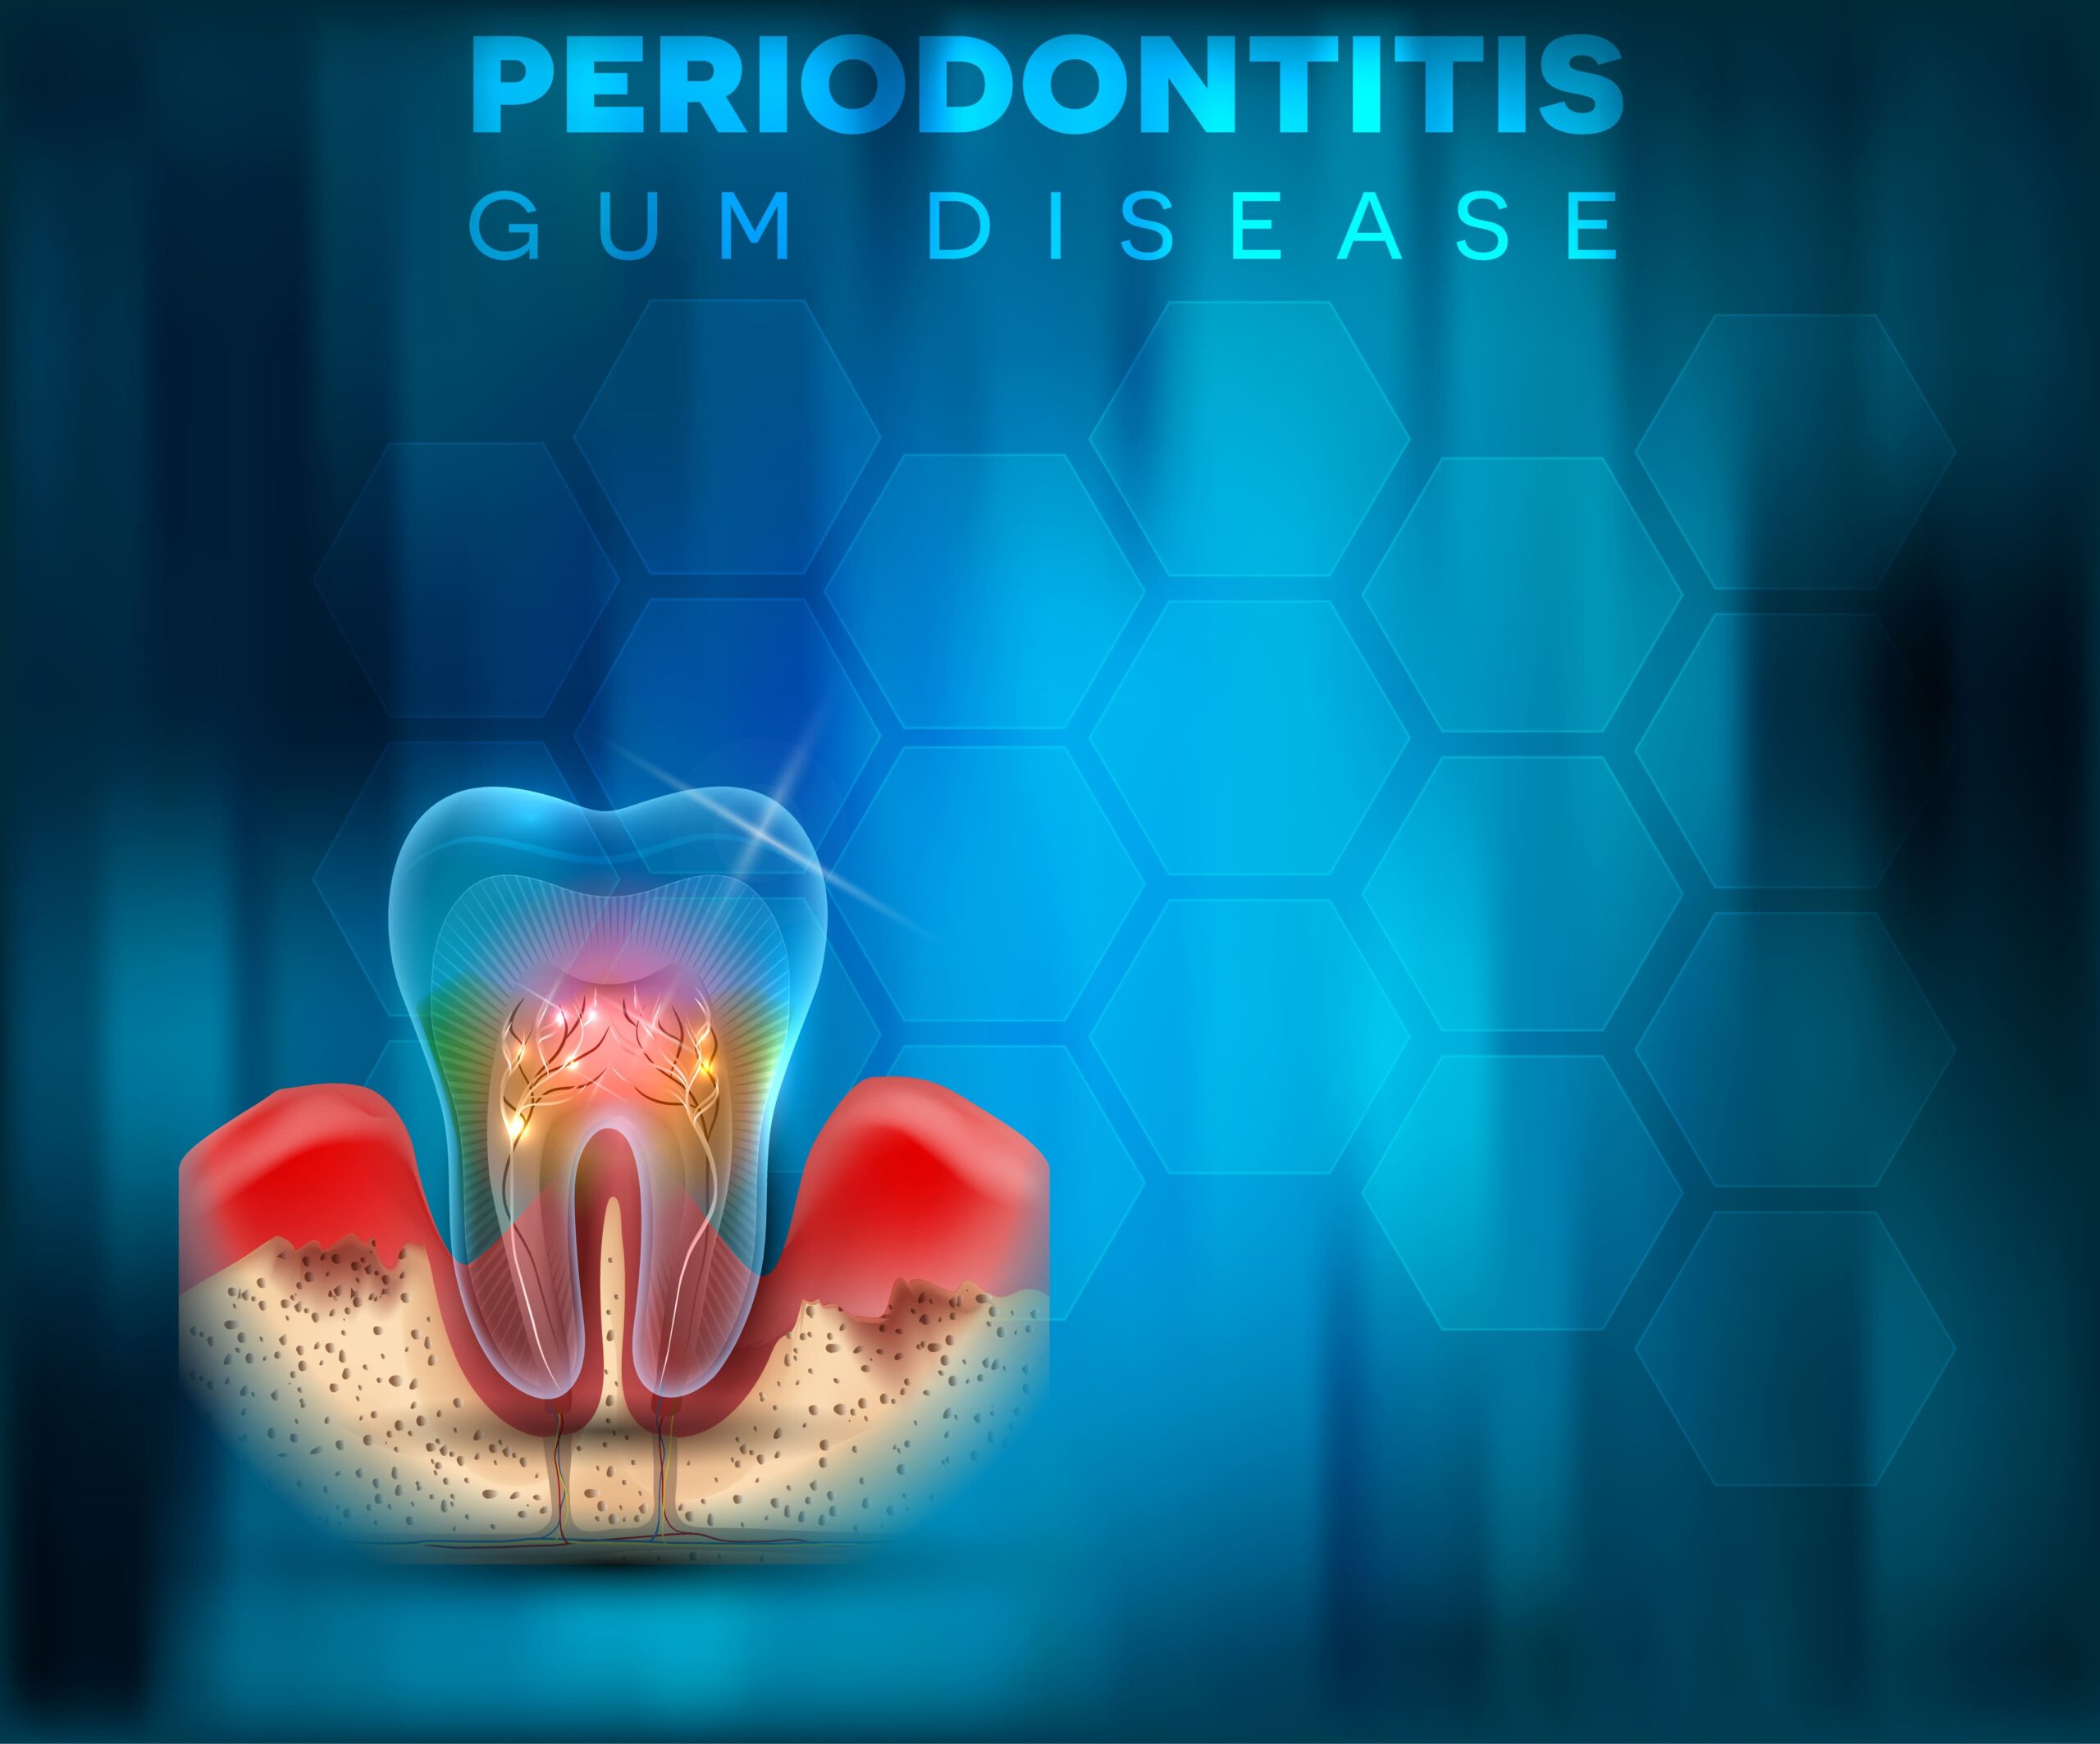 Can Gum Disease Be Cured?